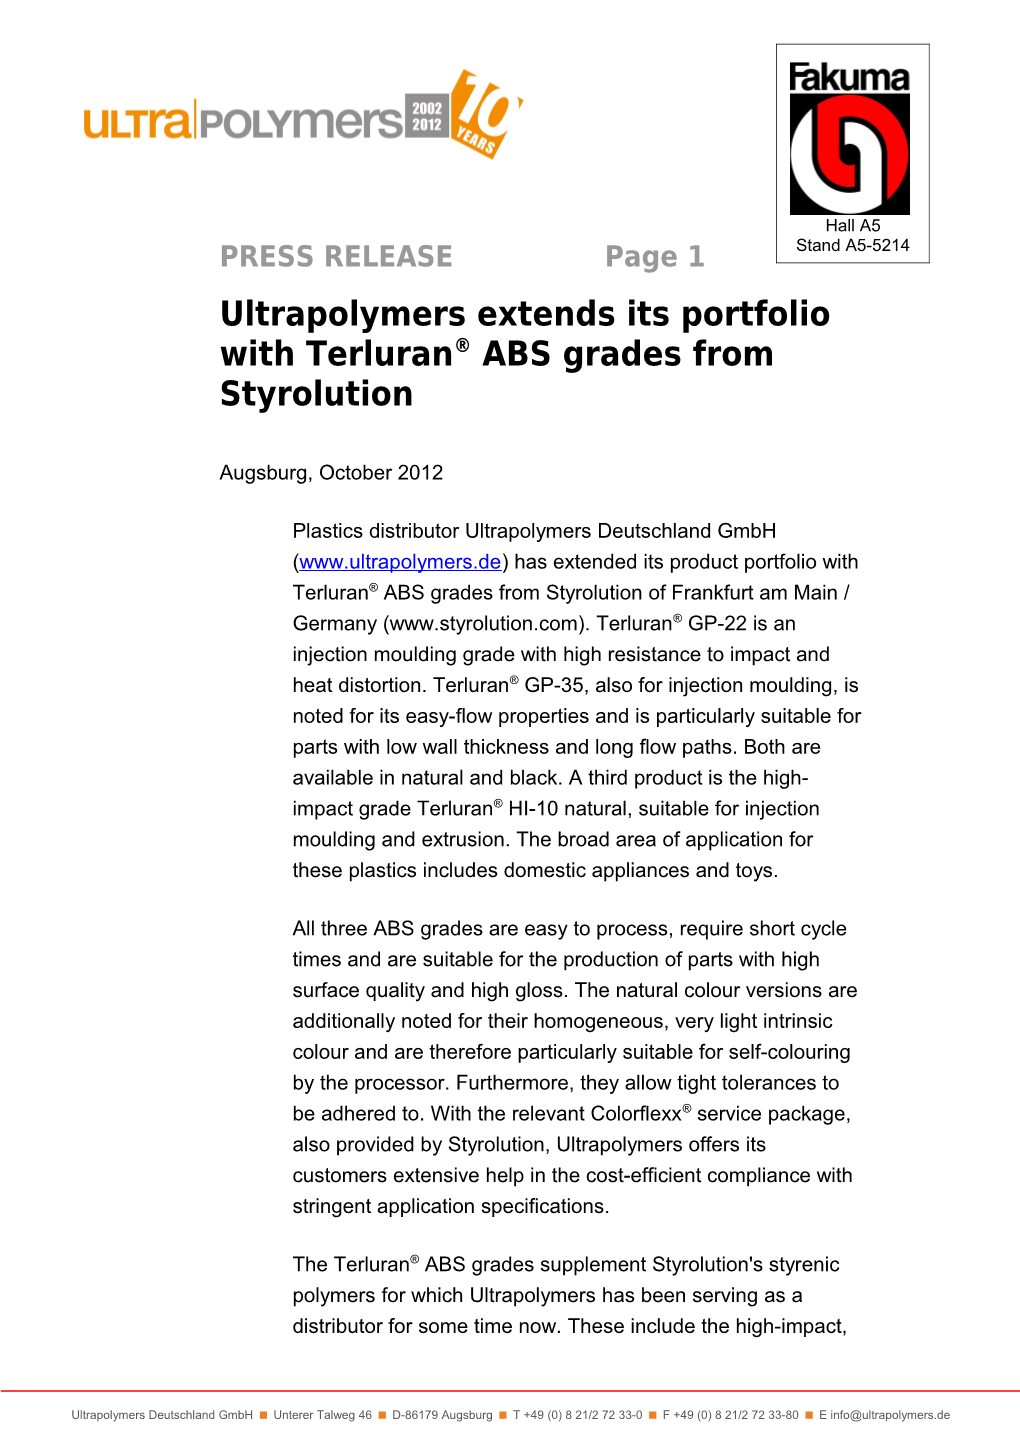 Ultrapolymers Extends Its Portfolio with Terluran ABS Grades from Styrolution